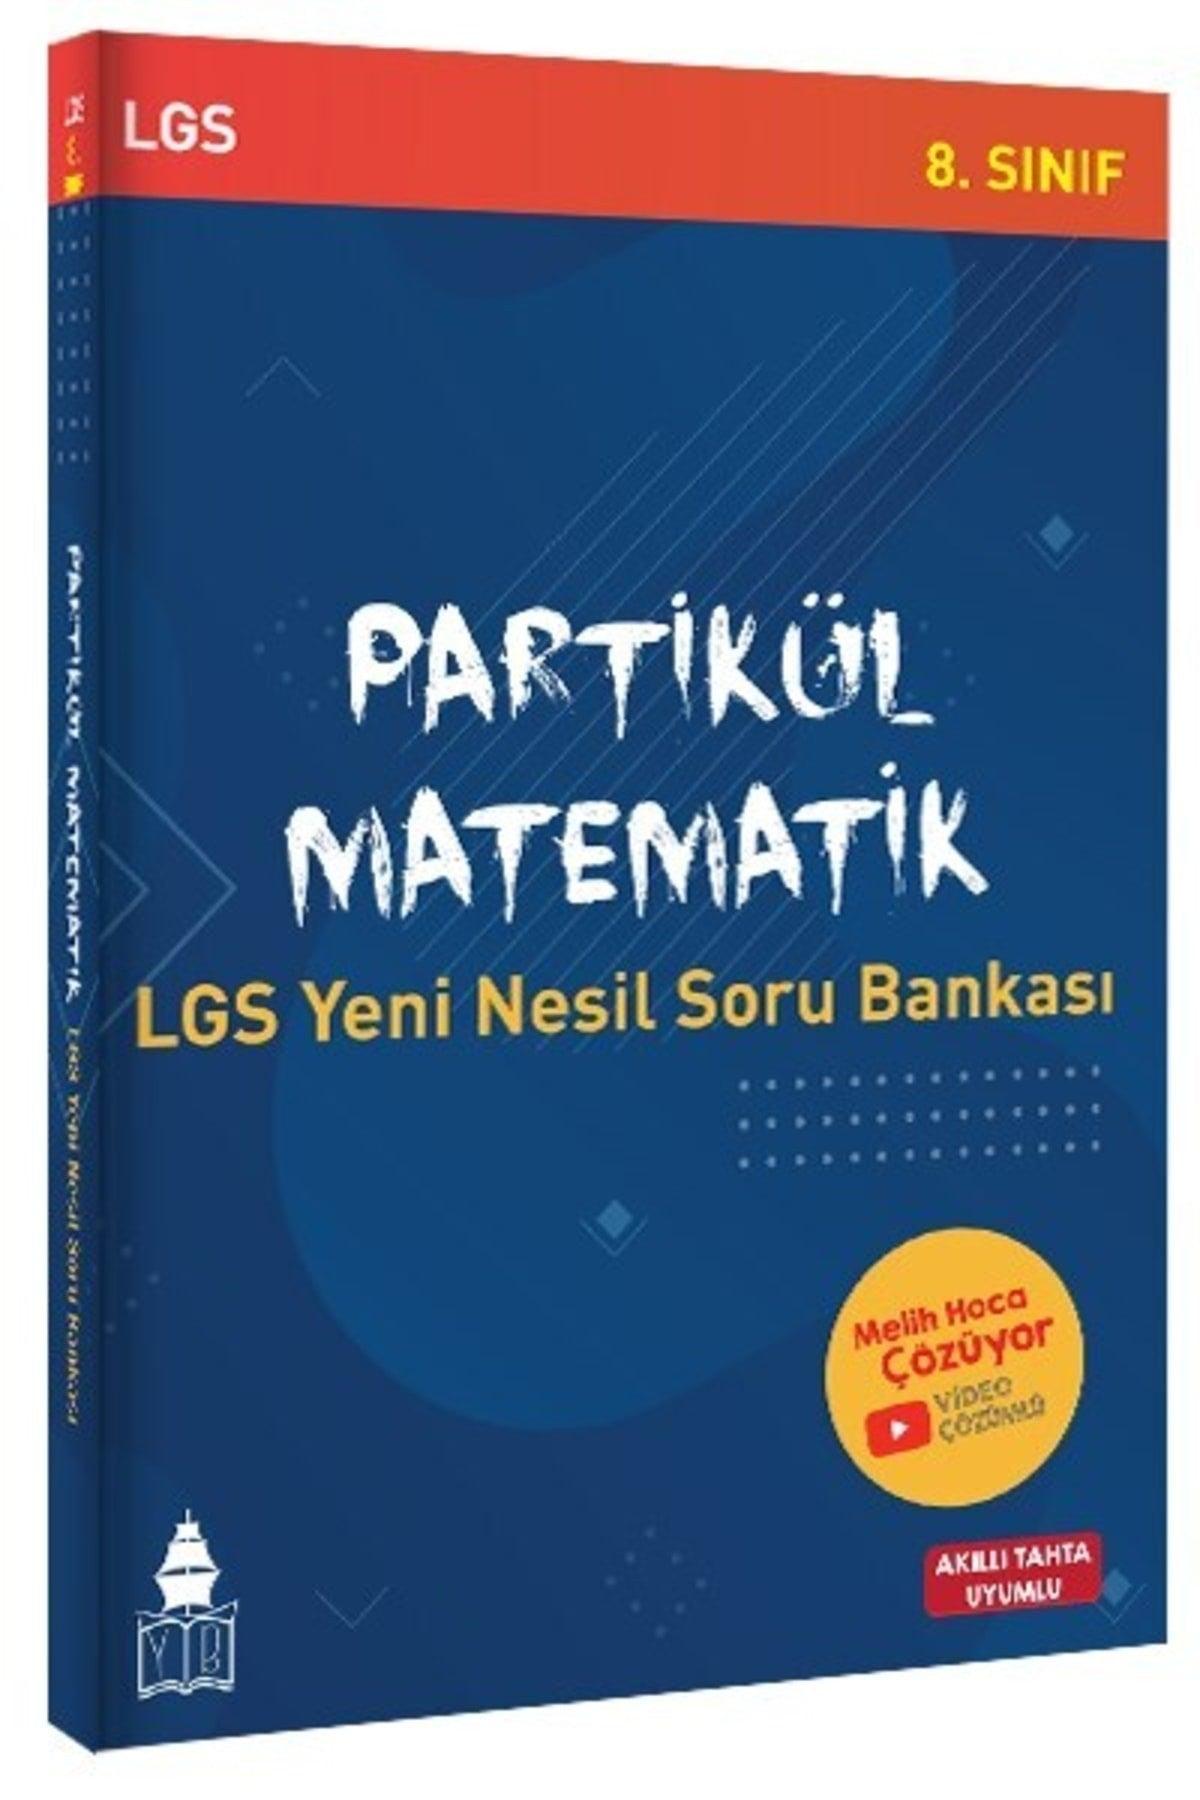 8th Grade Lgs Particle Mathematics Efso And New Generation Question Bank 2 Books - Tonguç Akademi - Swordslife